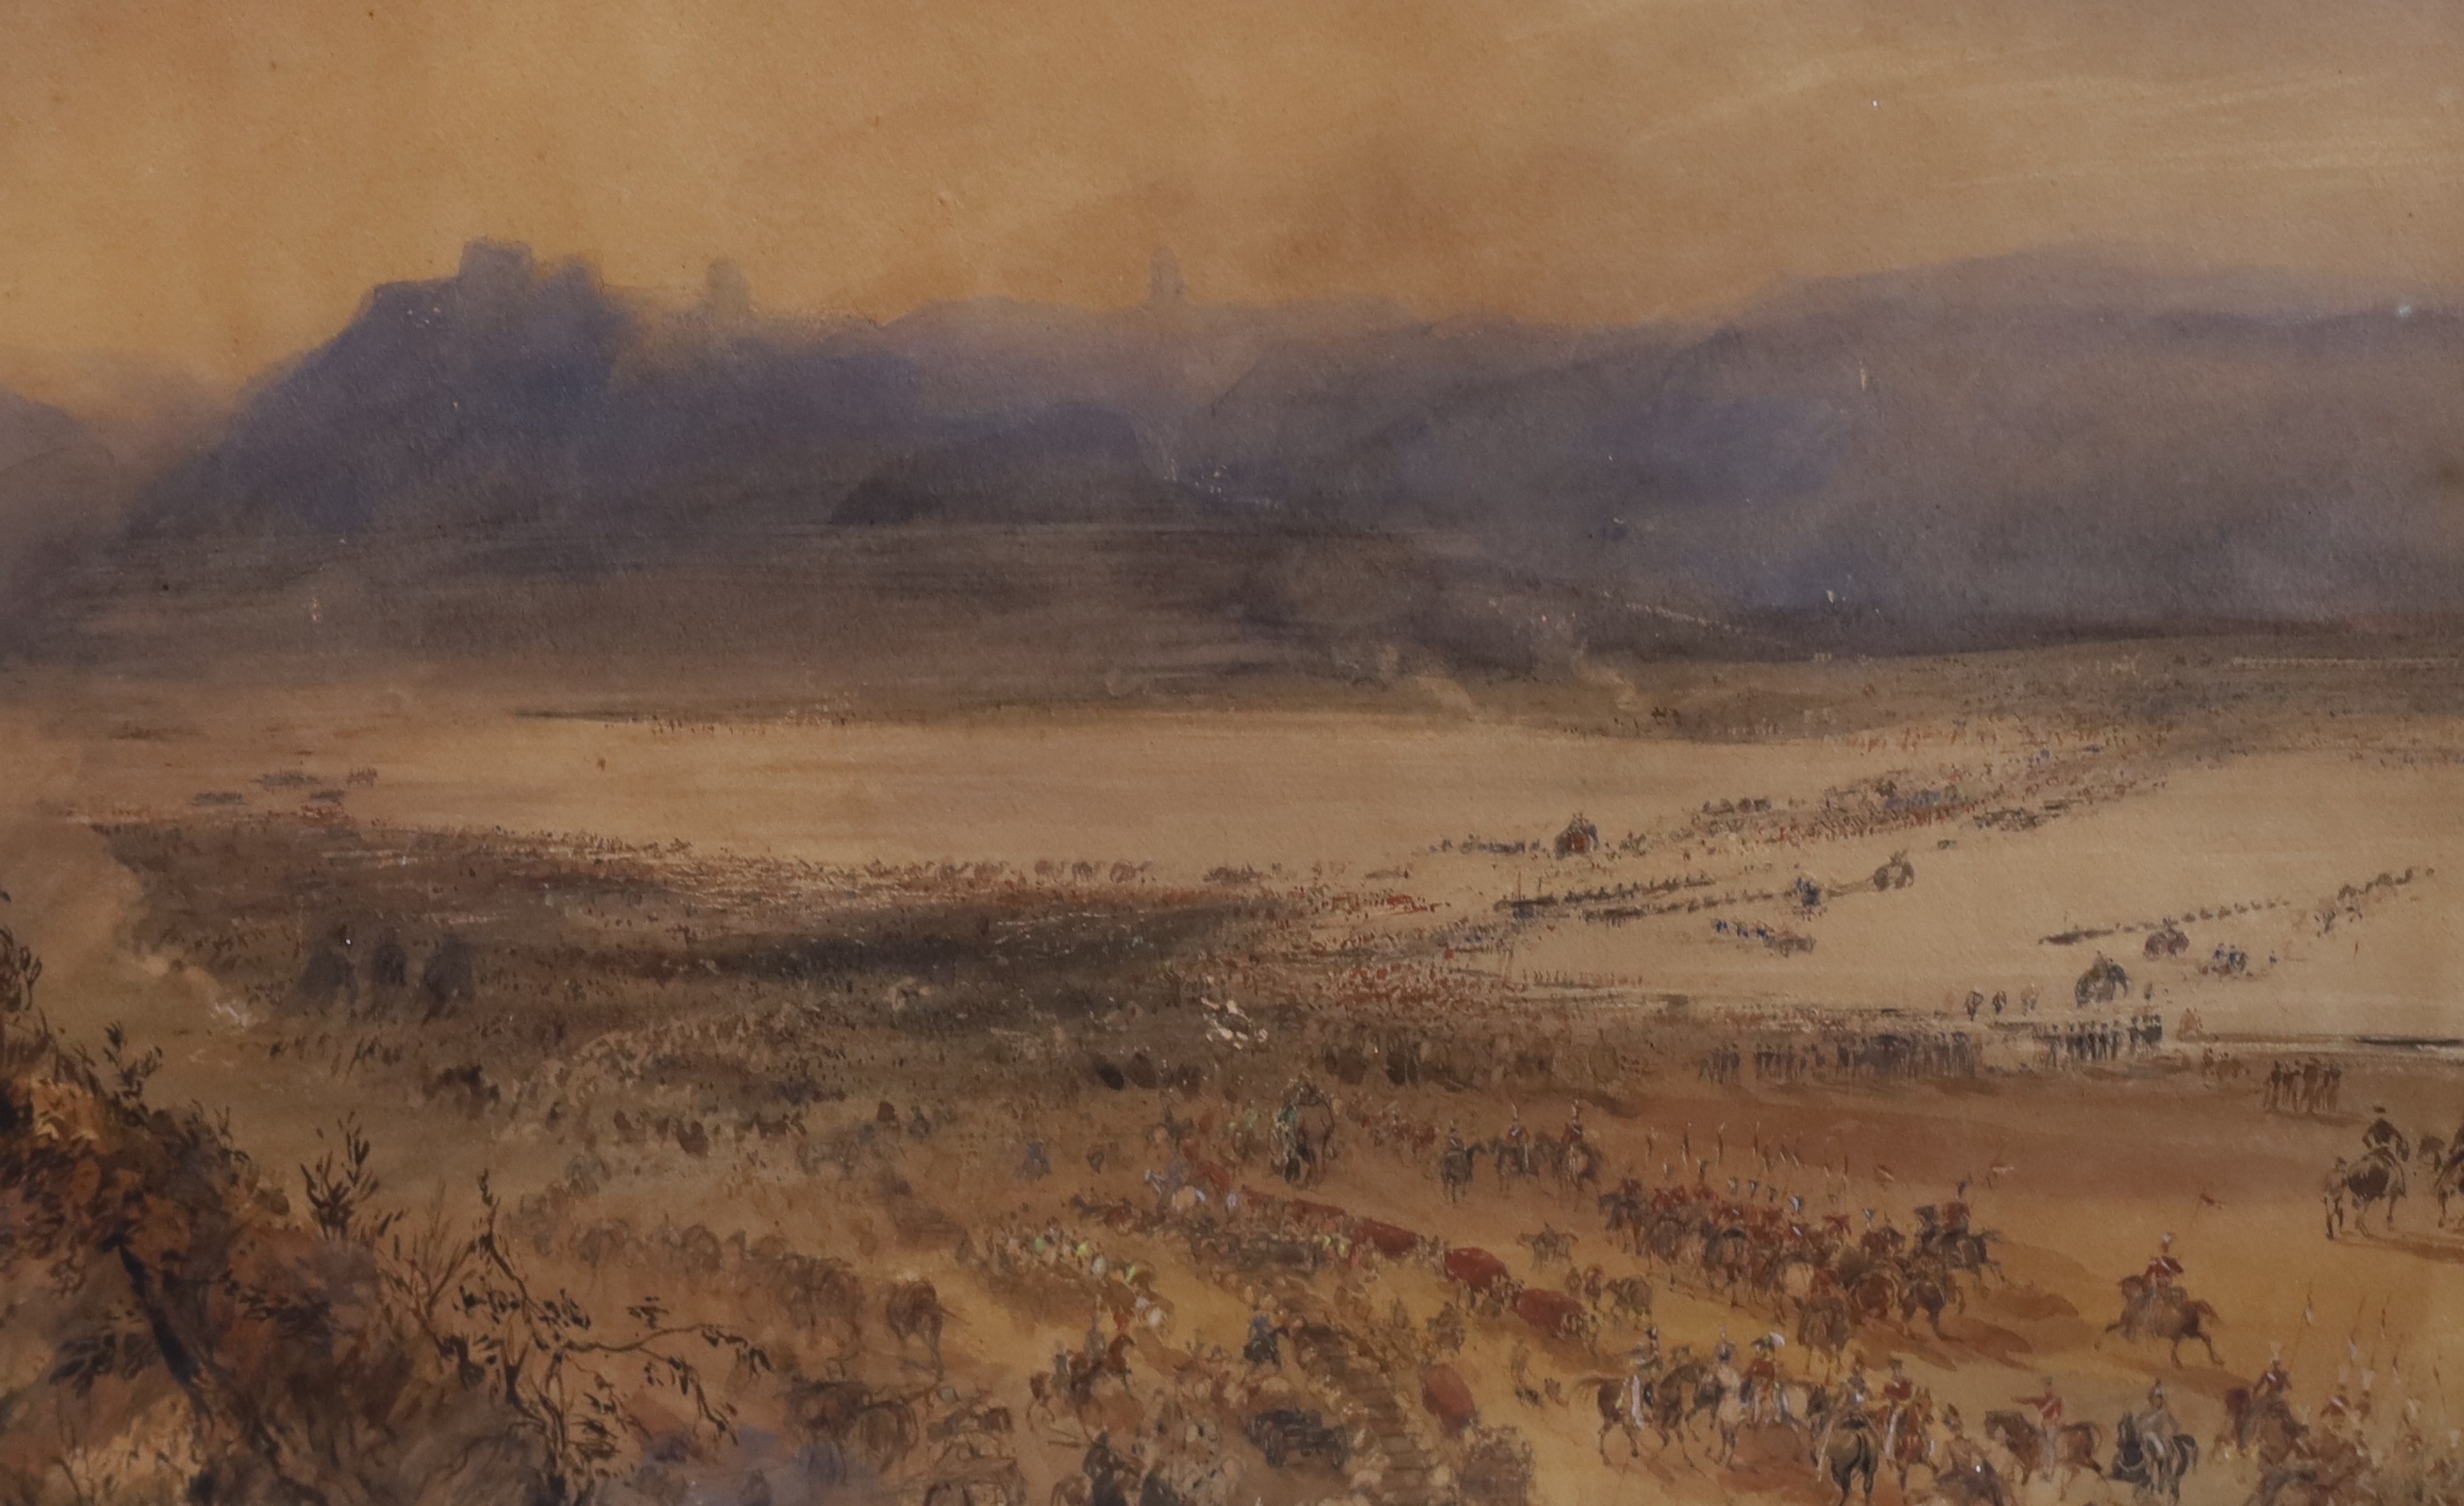 Major General Charles Becher Young RE (1816-1892), 'The Crossing of the Ghumbal', 1843', ink and watercolour, 30.5 x 47cm